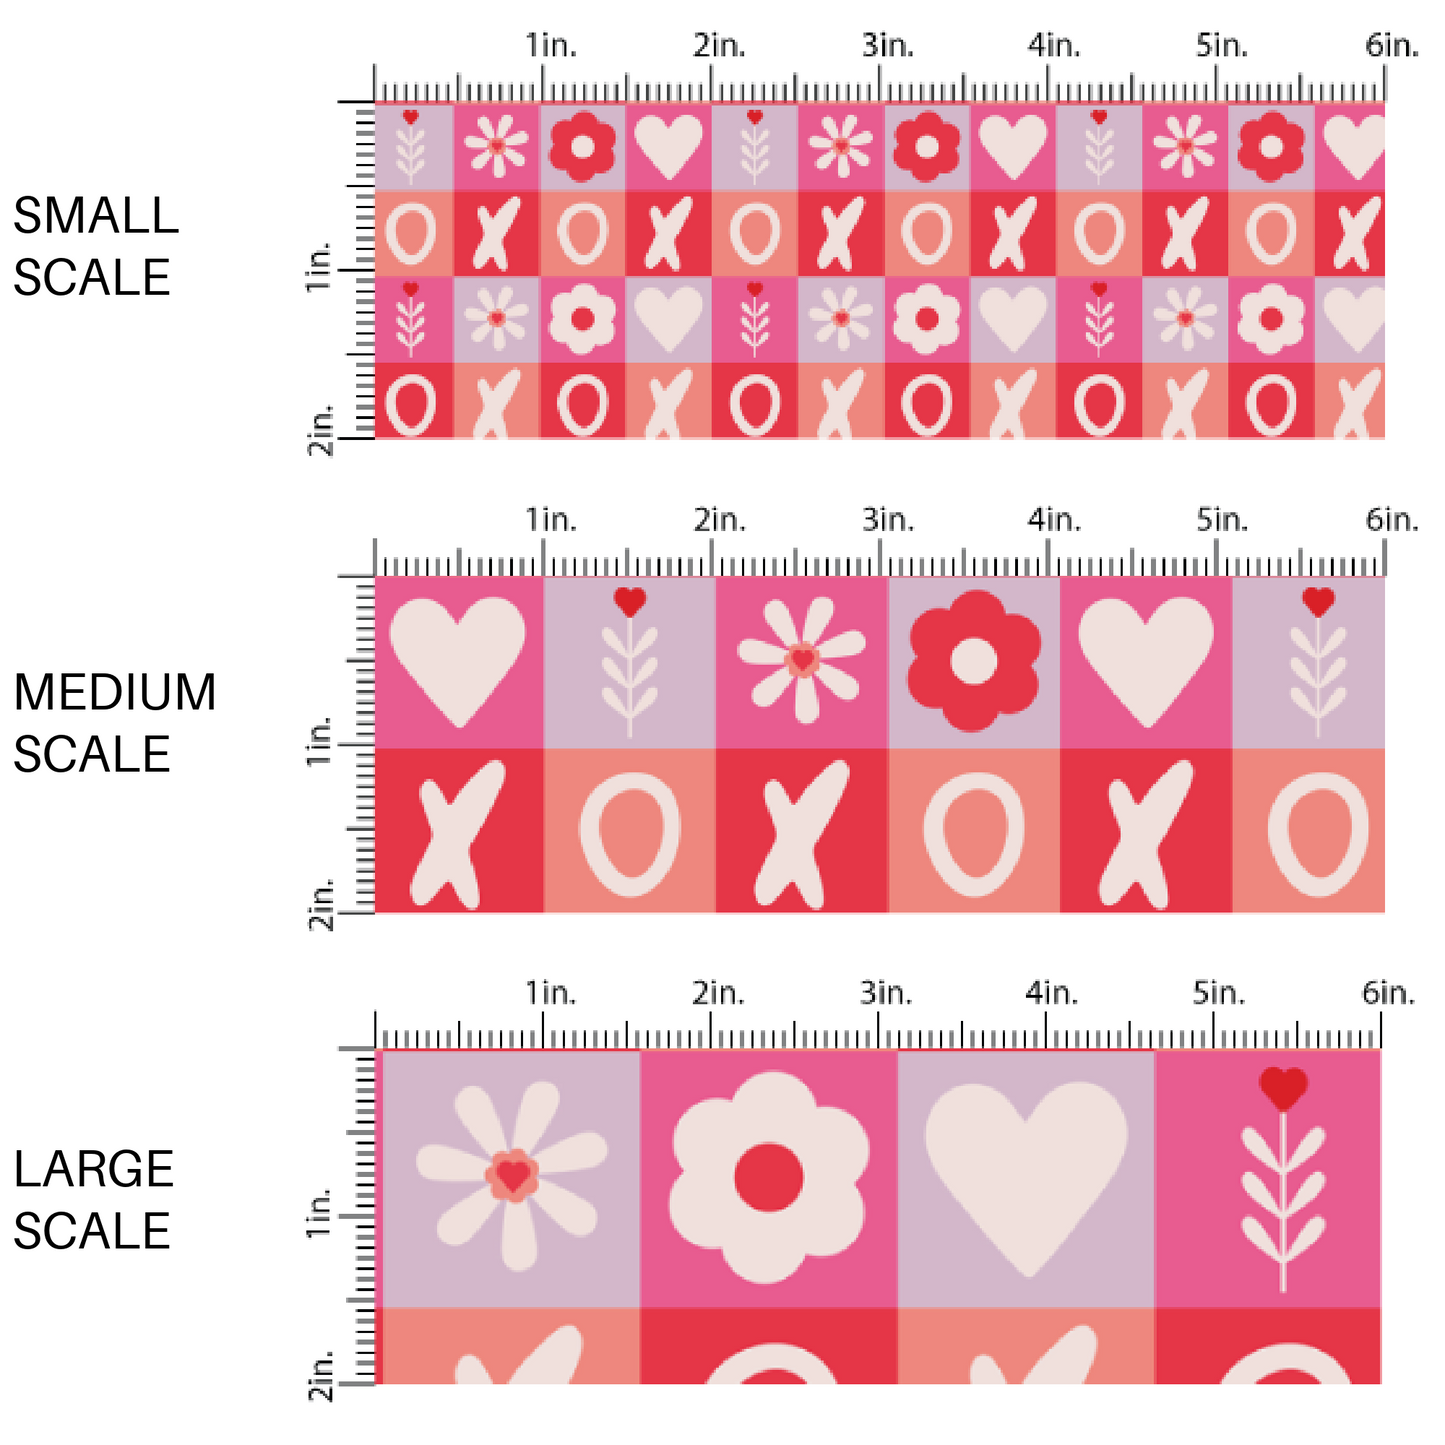 "XO's", Hearts, and Floral Checkered Fabric by the Yard scaled image guide.